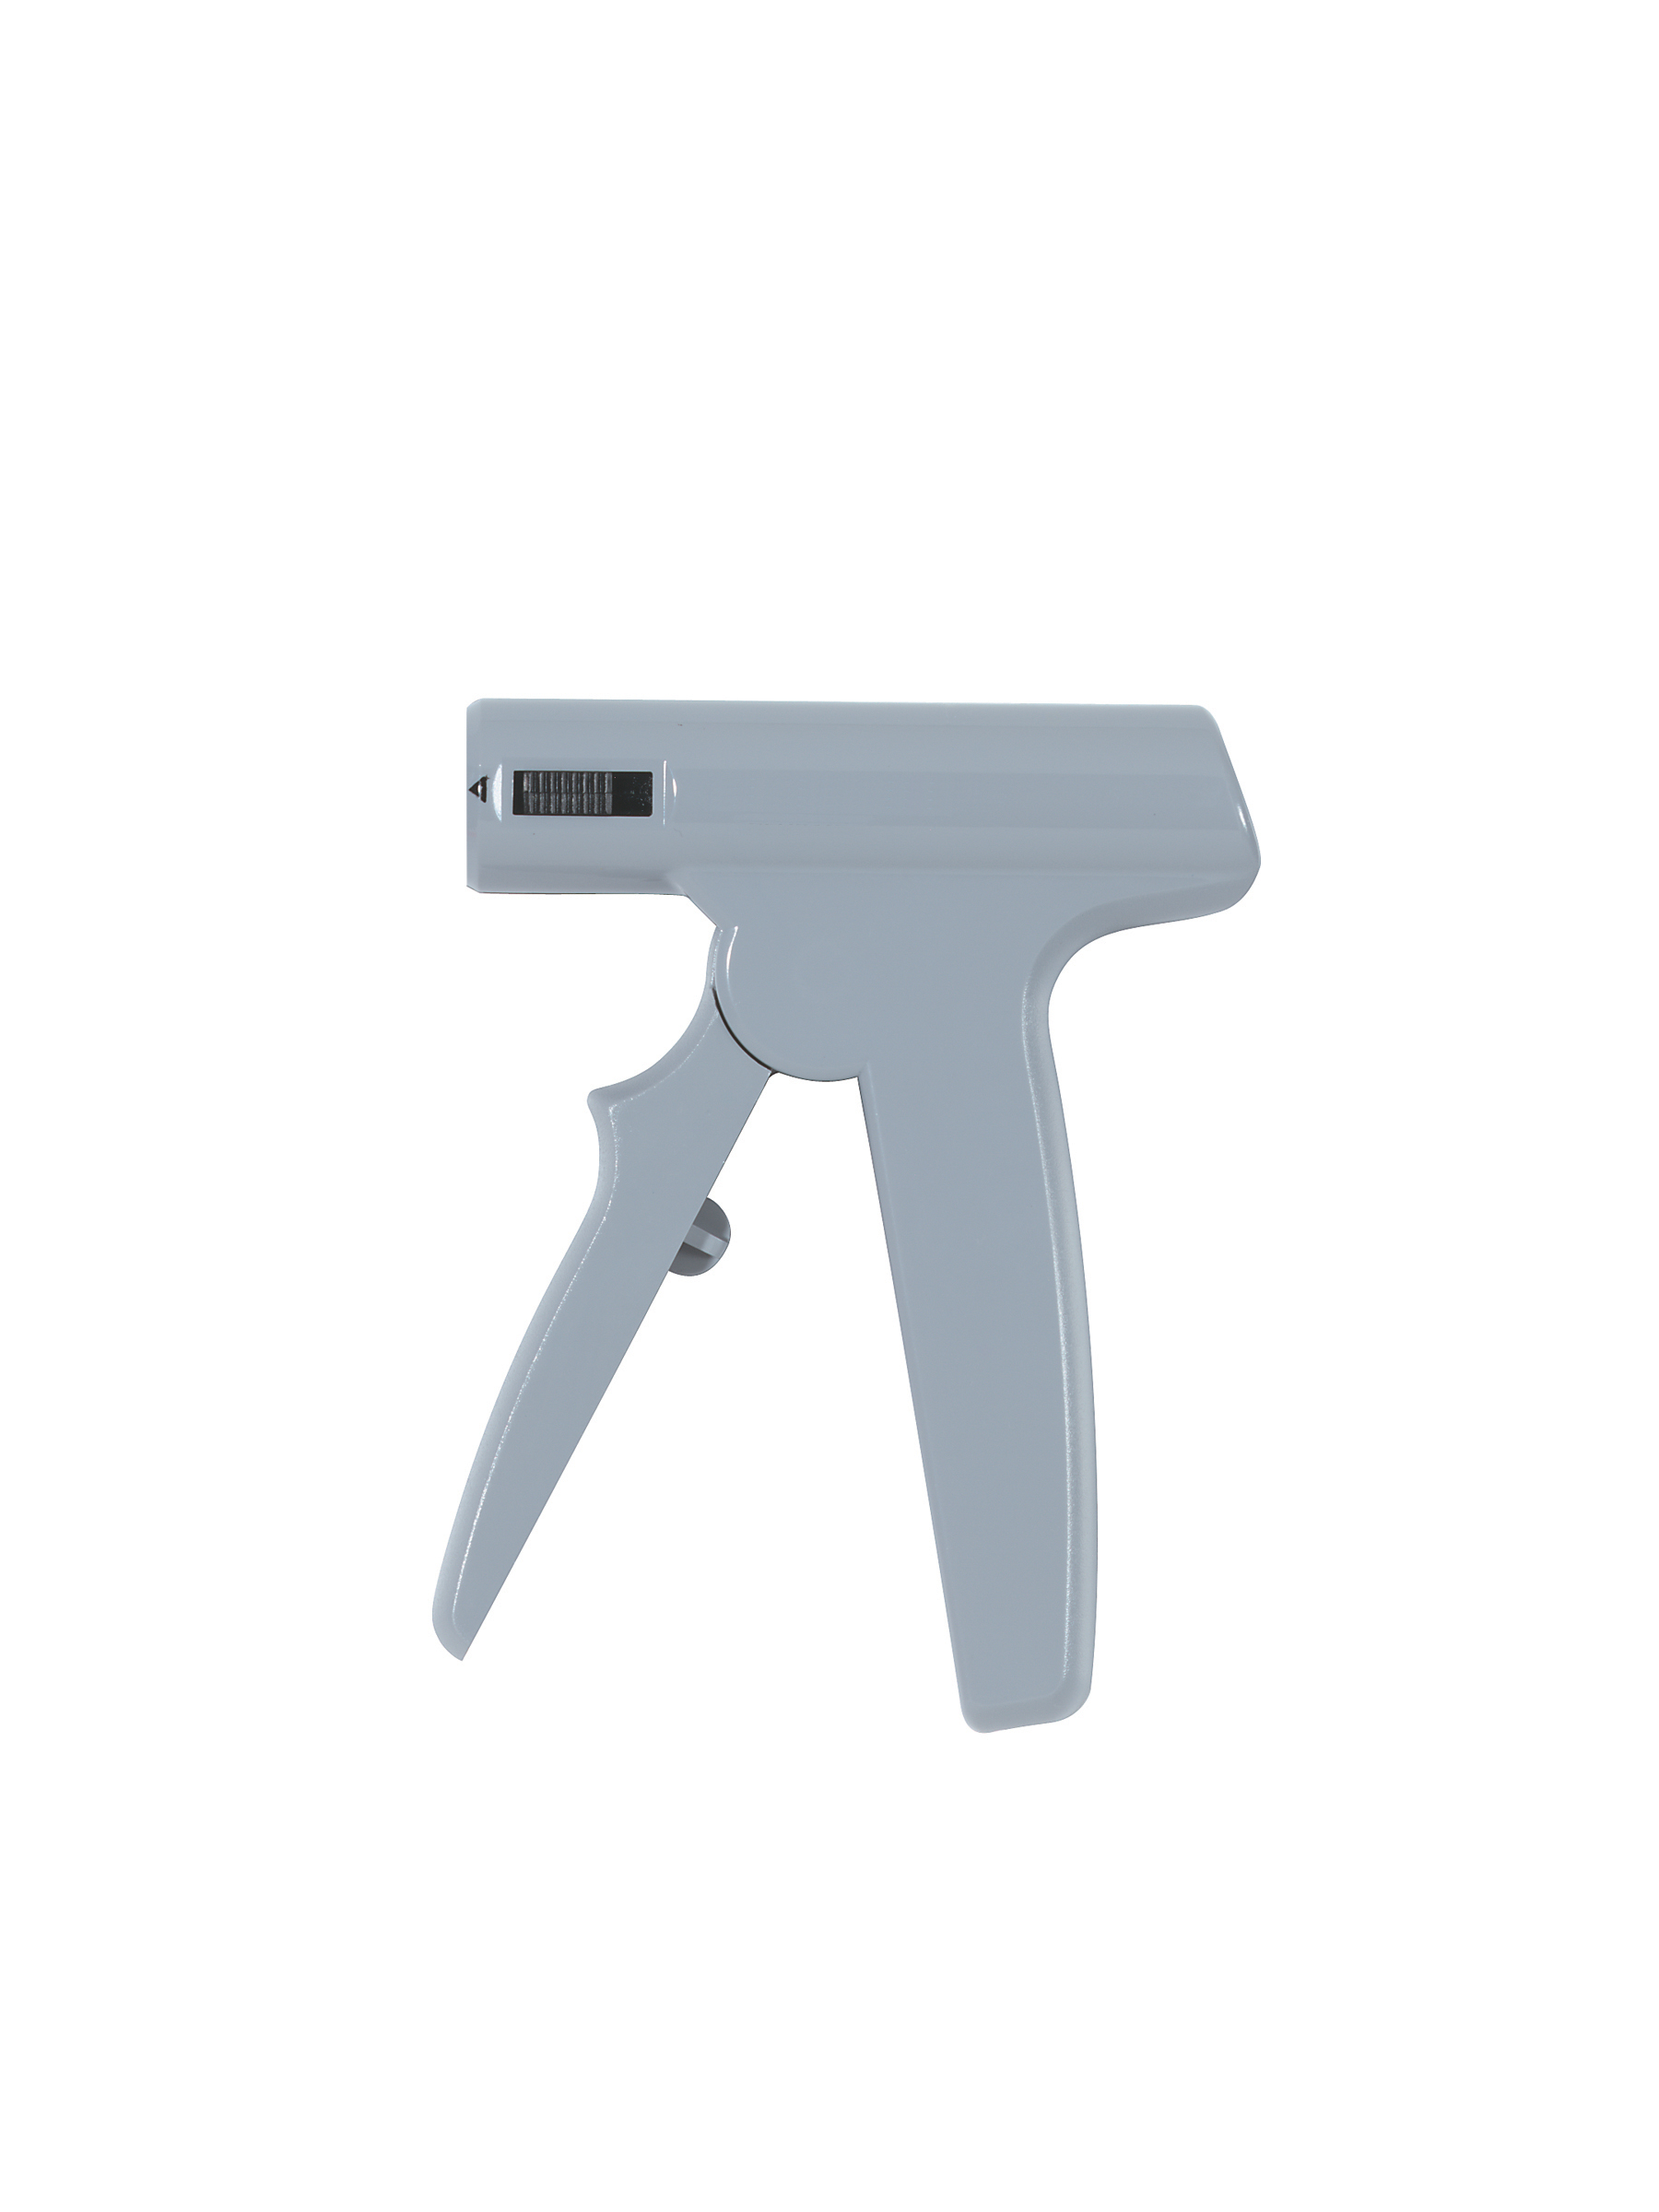 Reloadable Skin Stapler with Rotating Head